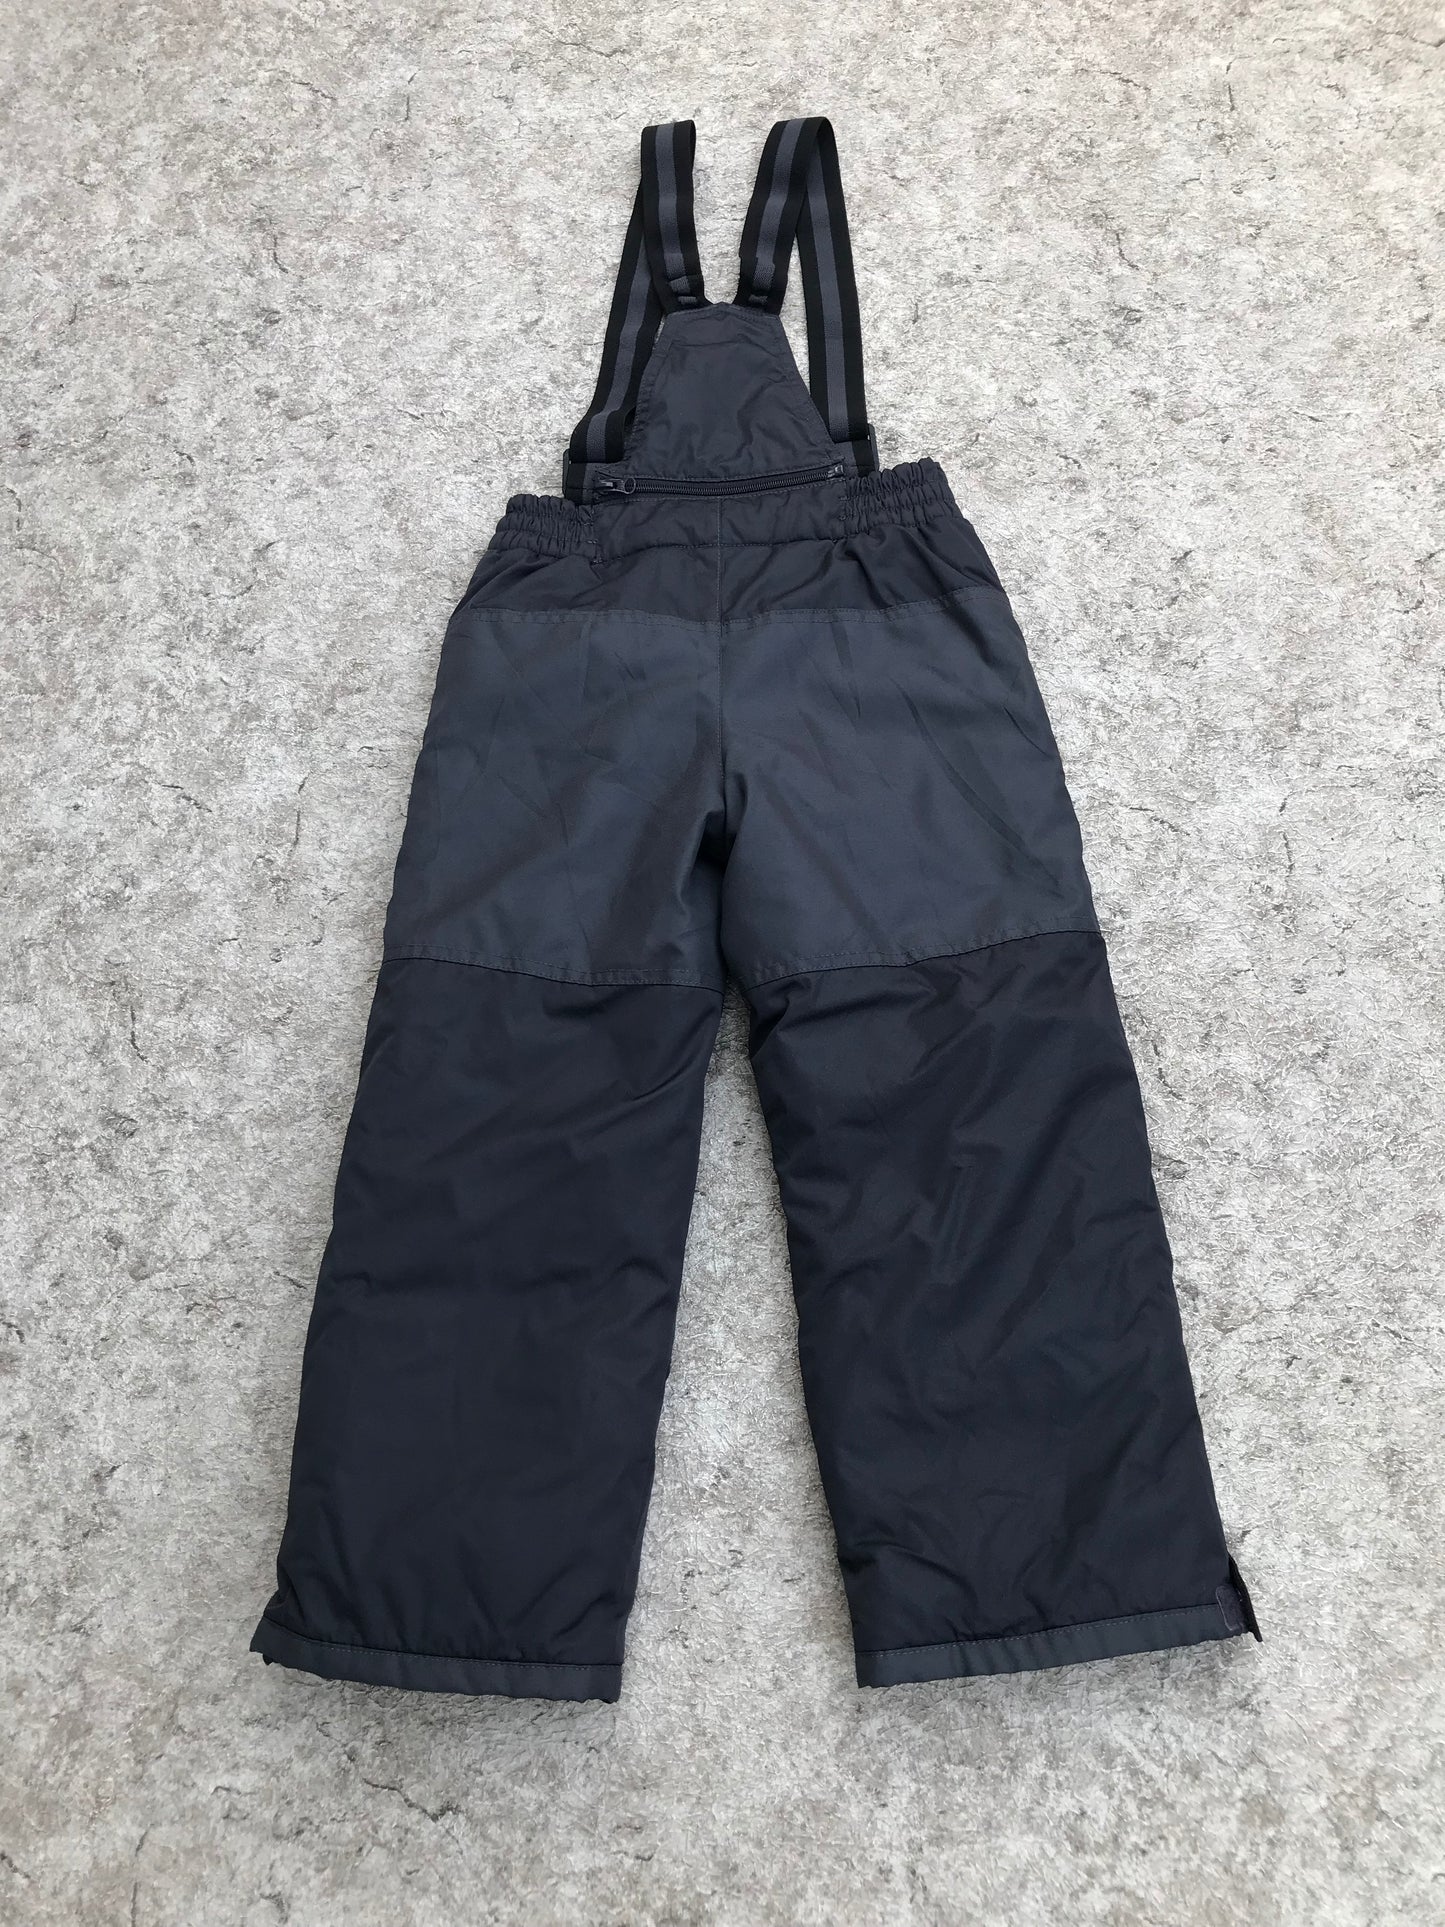 Snow Pants Child Size 6-7 With Removeable Straps Fleece Lined Black Excellent